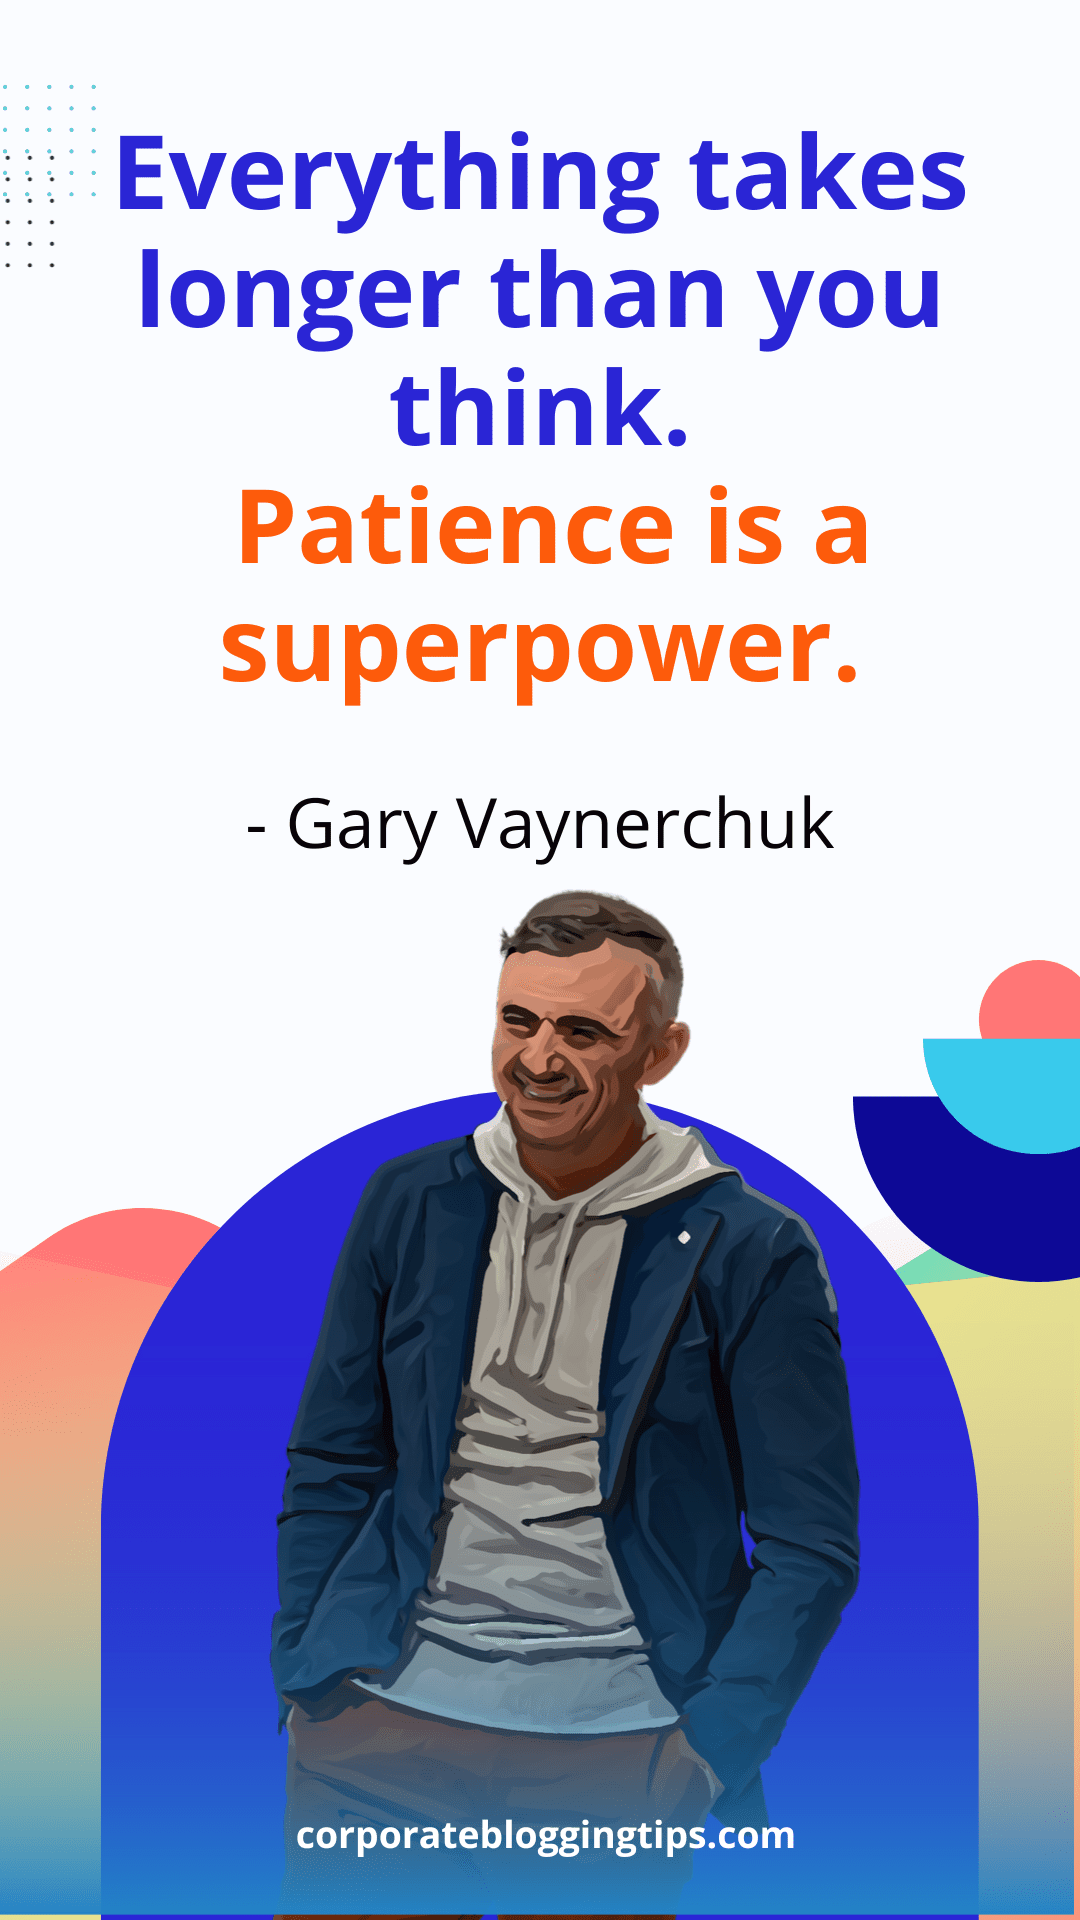 Gary Vaynerchuk quotes for patience building